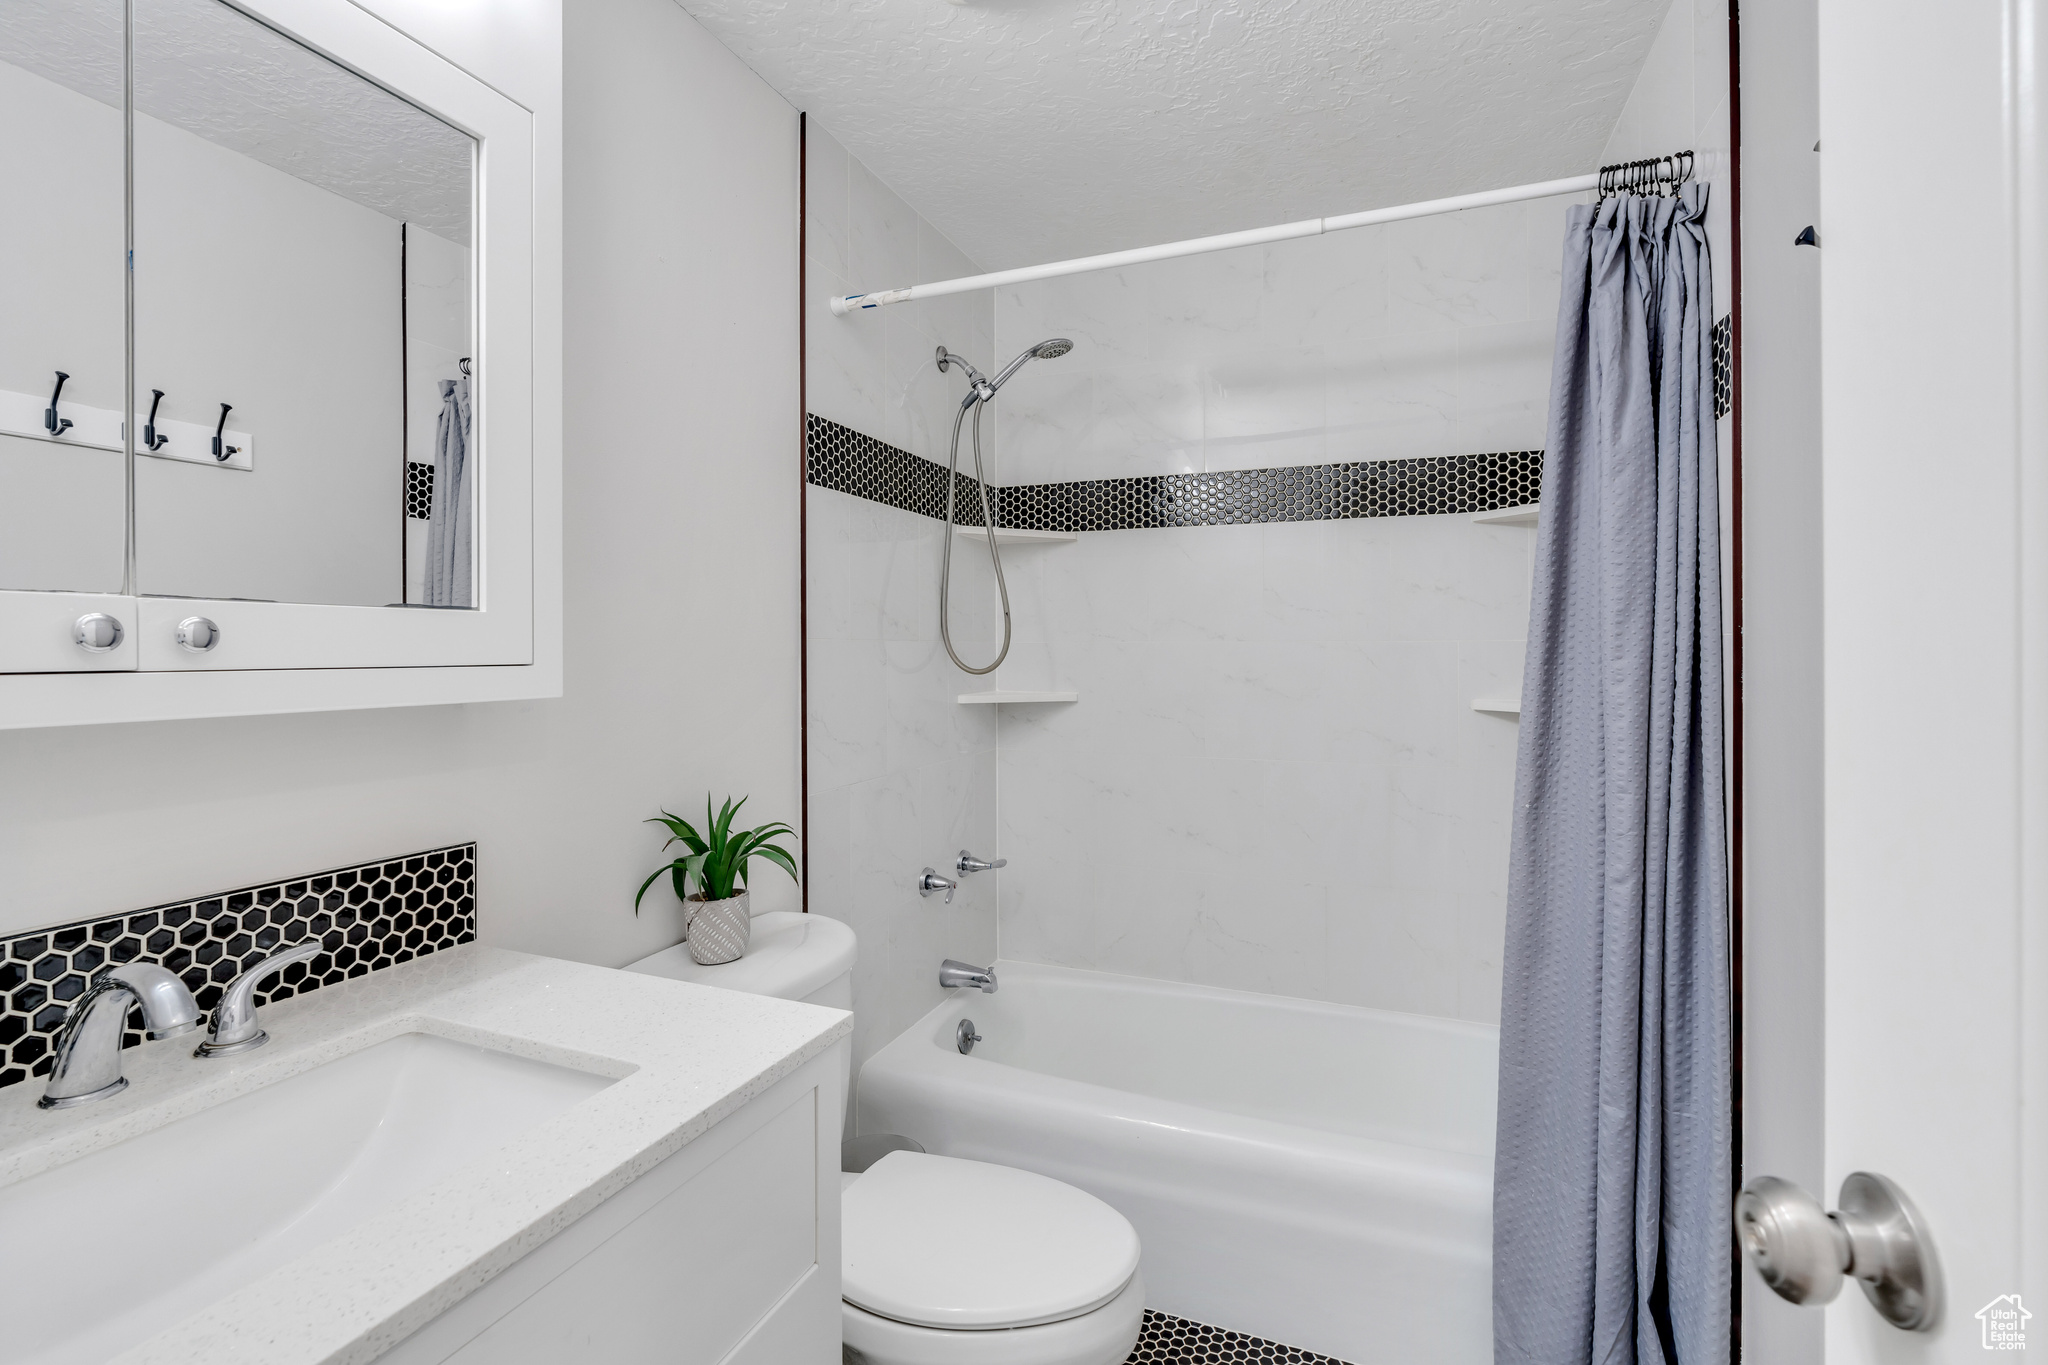 Full bathroom featuring a textured ceiling, shower / tub combo, toilet, and oversized vanity